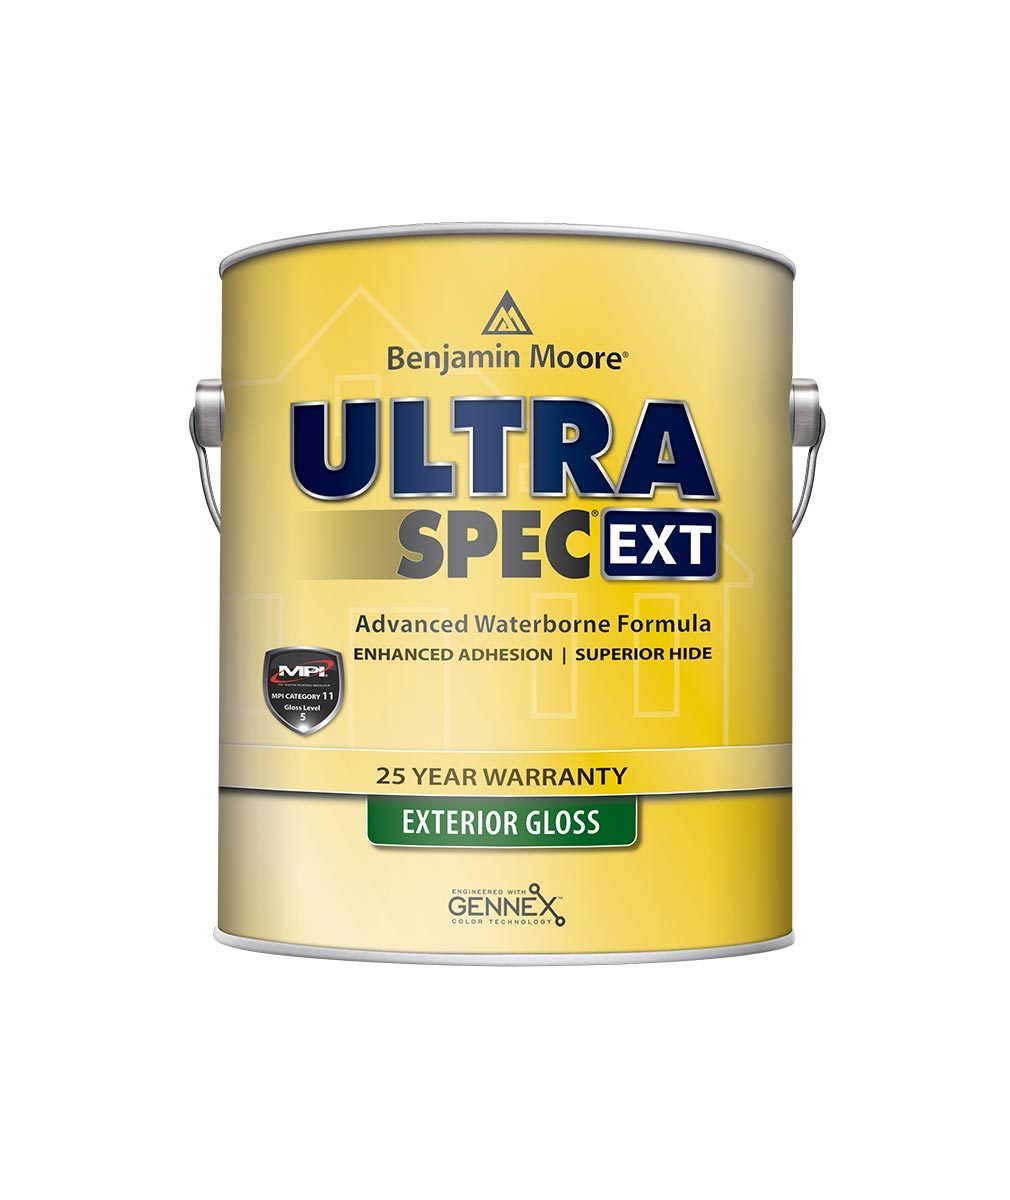 Benjamin Moore Ultra Spec EXT exterior paint in gloss finish available at JC Licht.